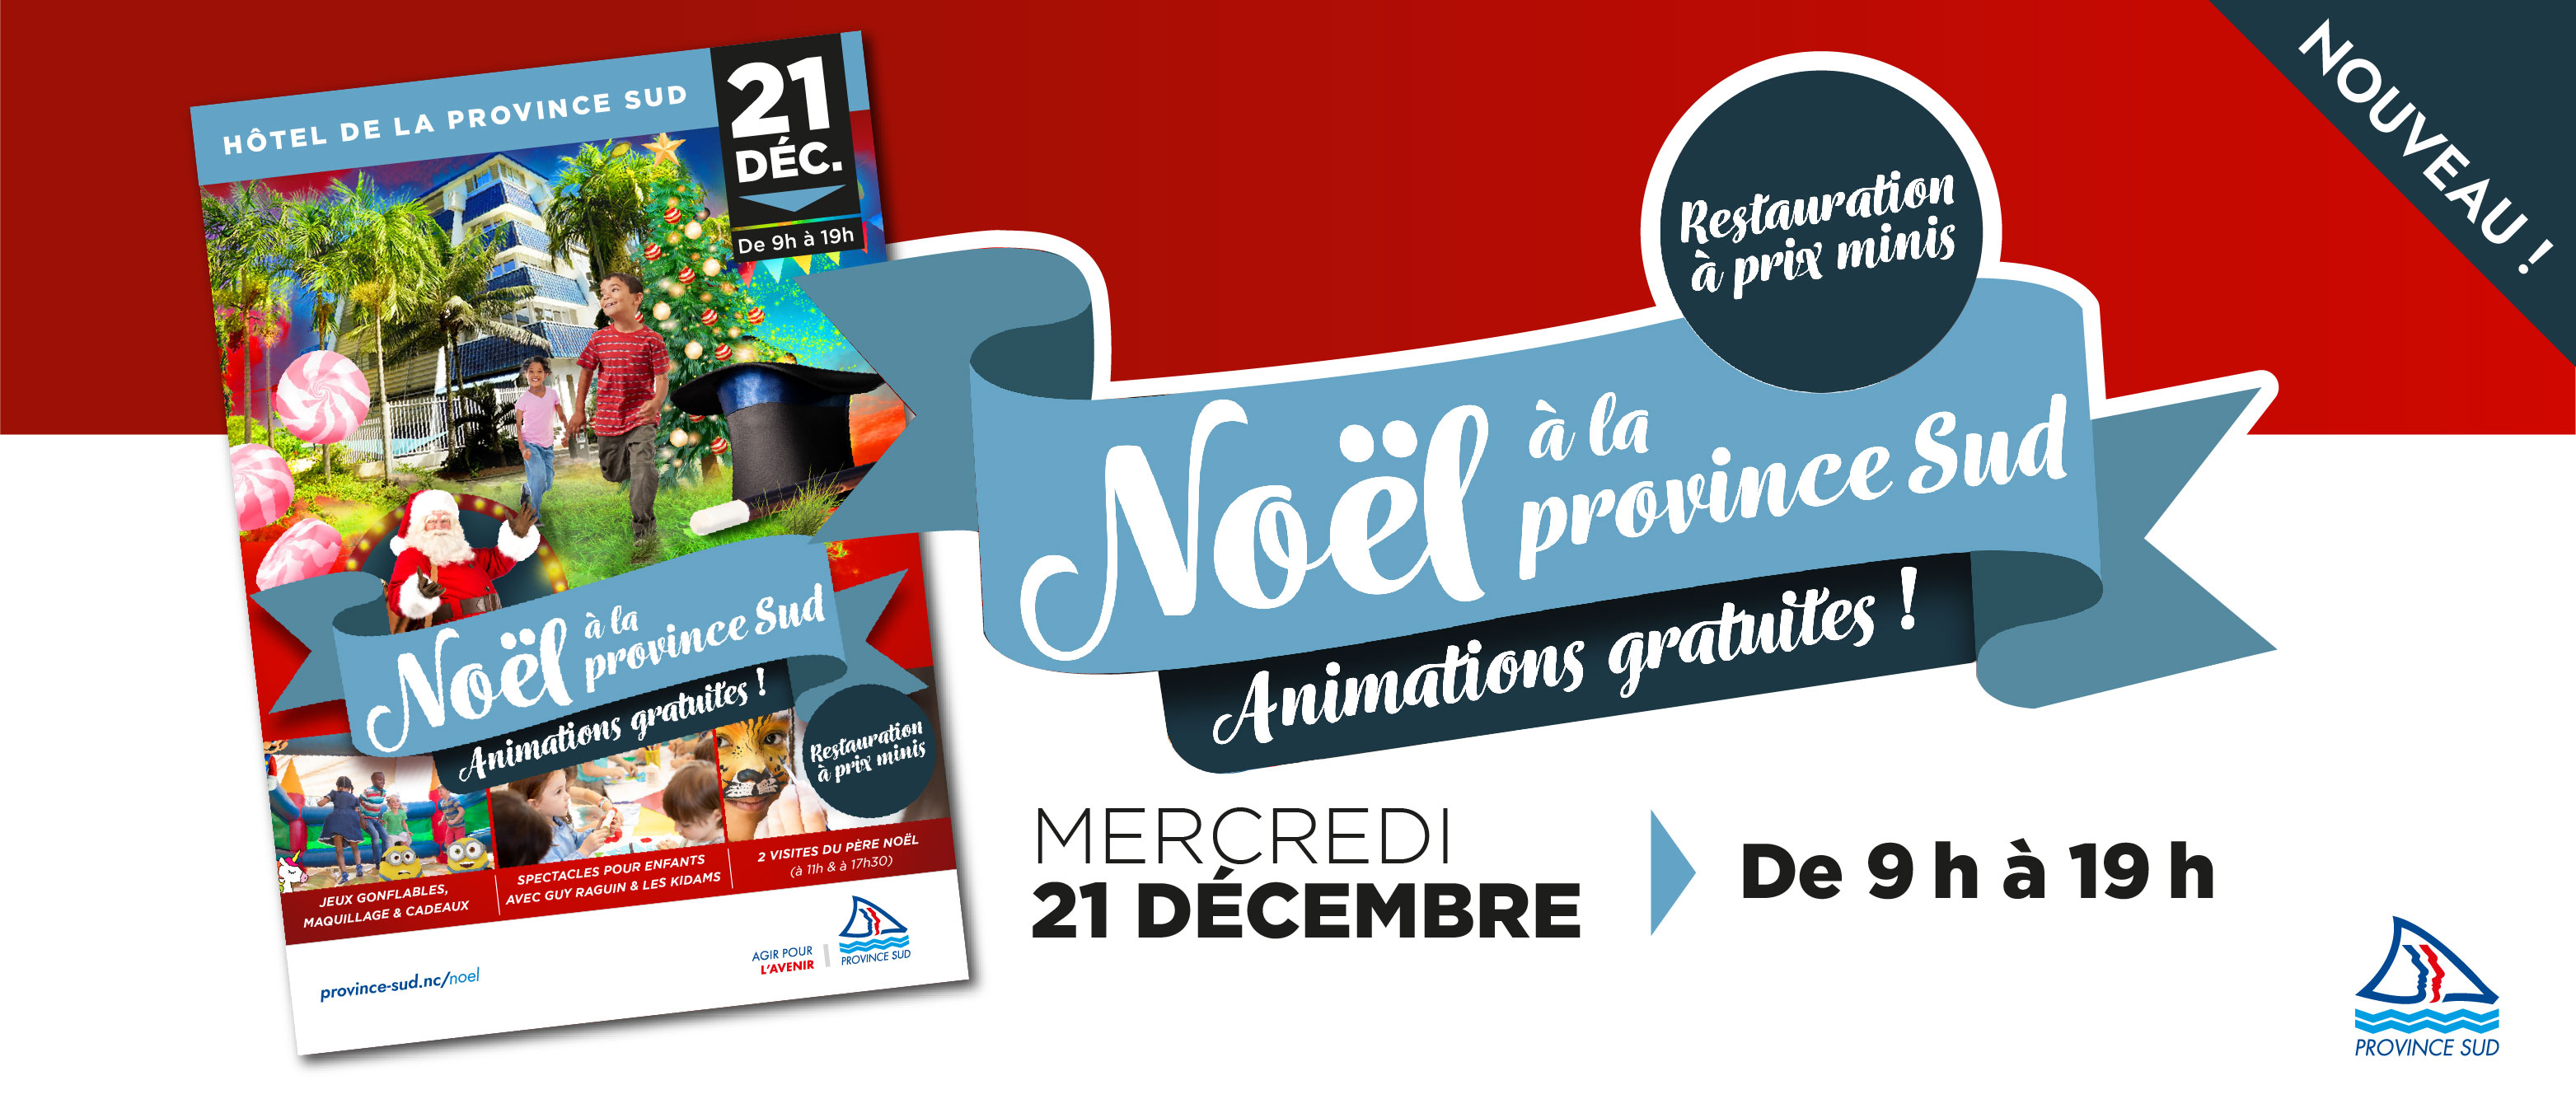 psud-noel-populaire-outils-numeriques_tetiere-page-hub.jpg